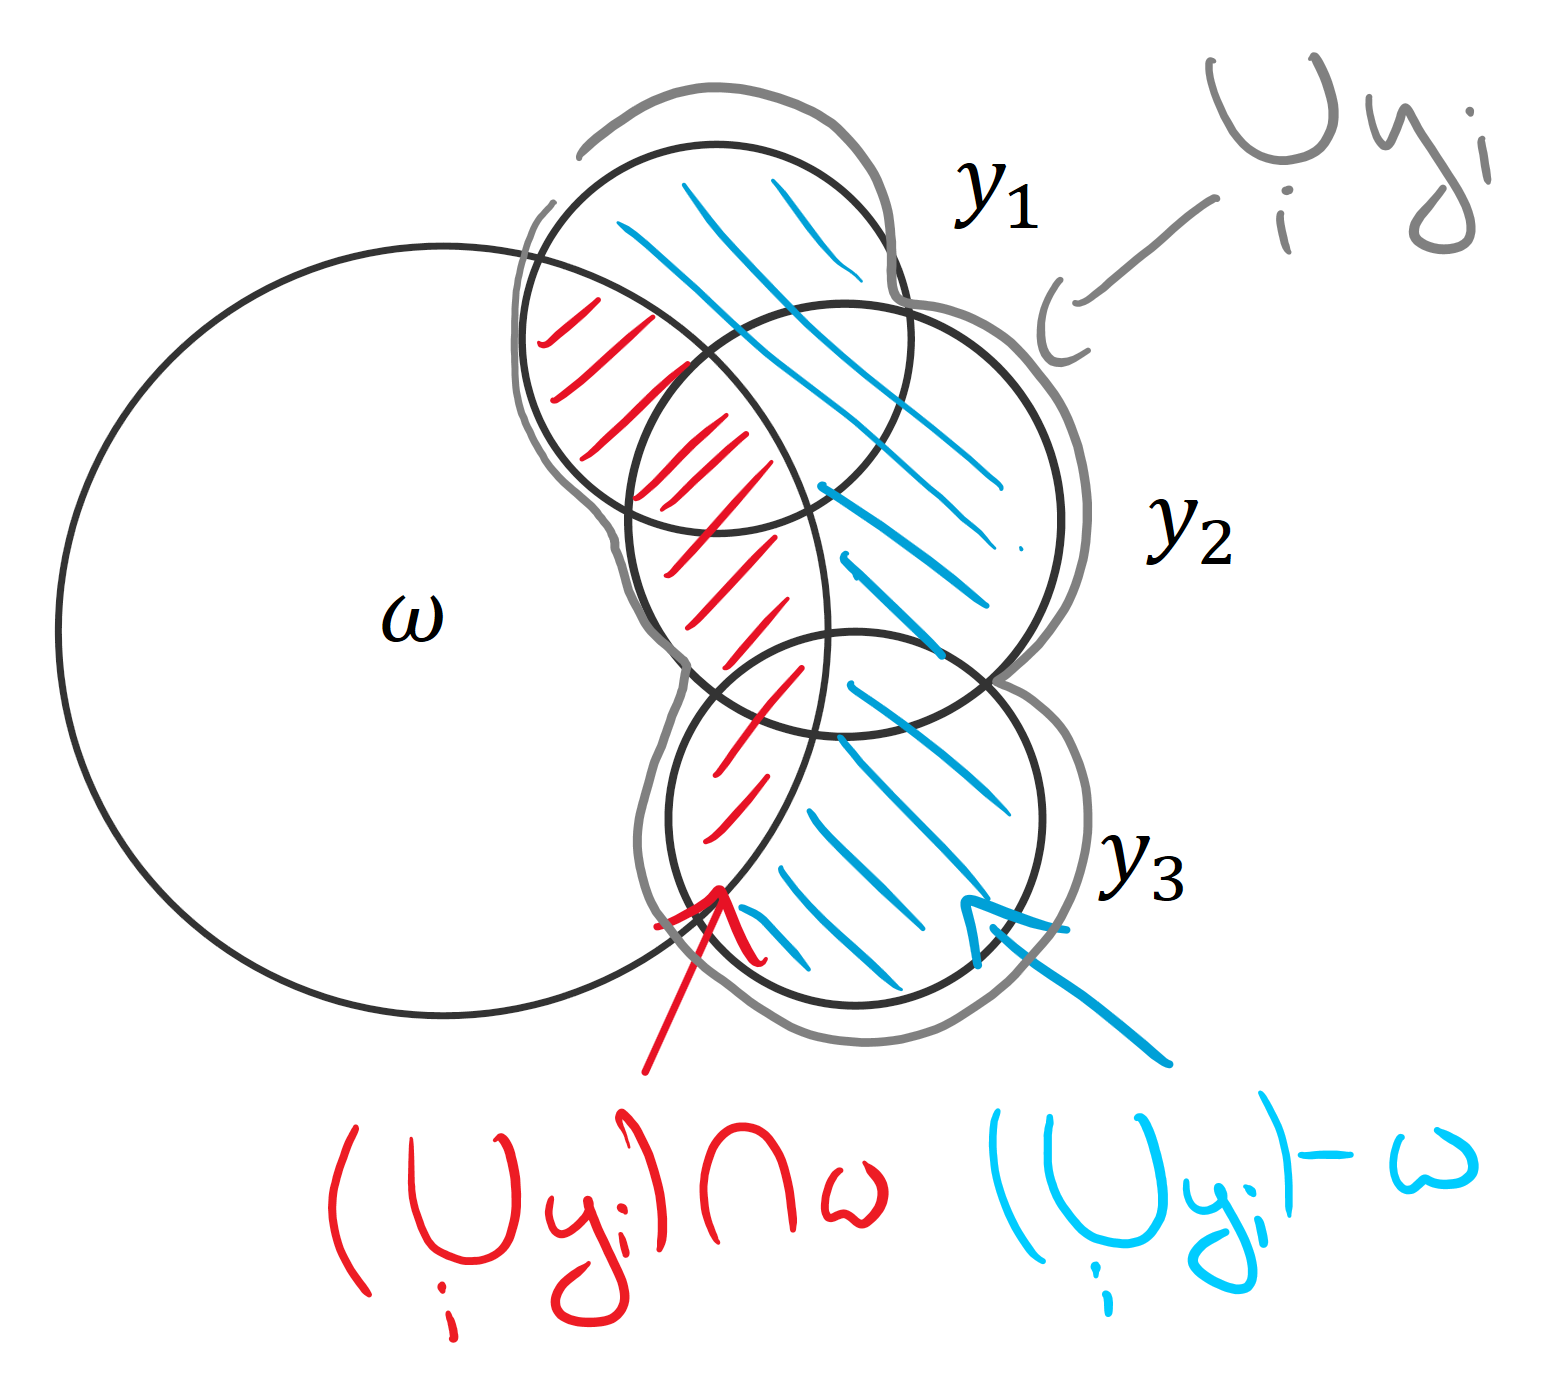 Visualizings how the terms on the left-hand side (blue and red) complement each other to form the right-hand side (gray).